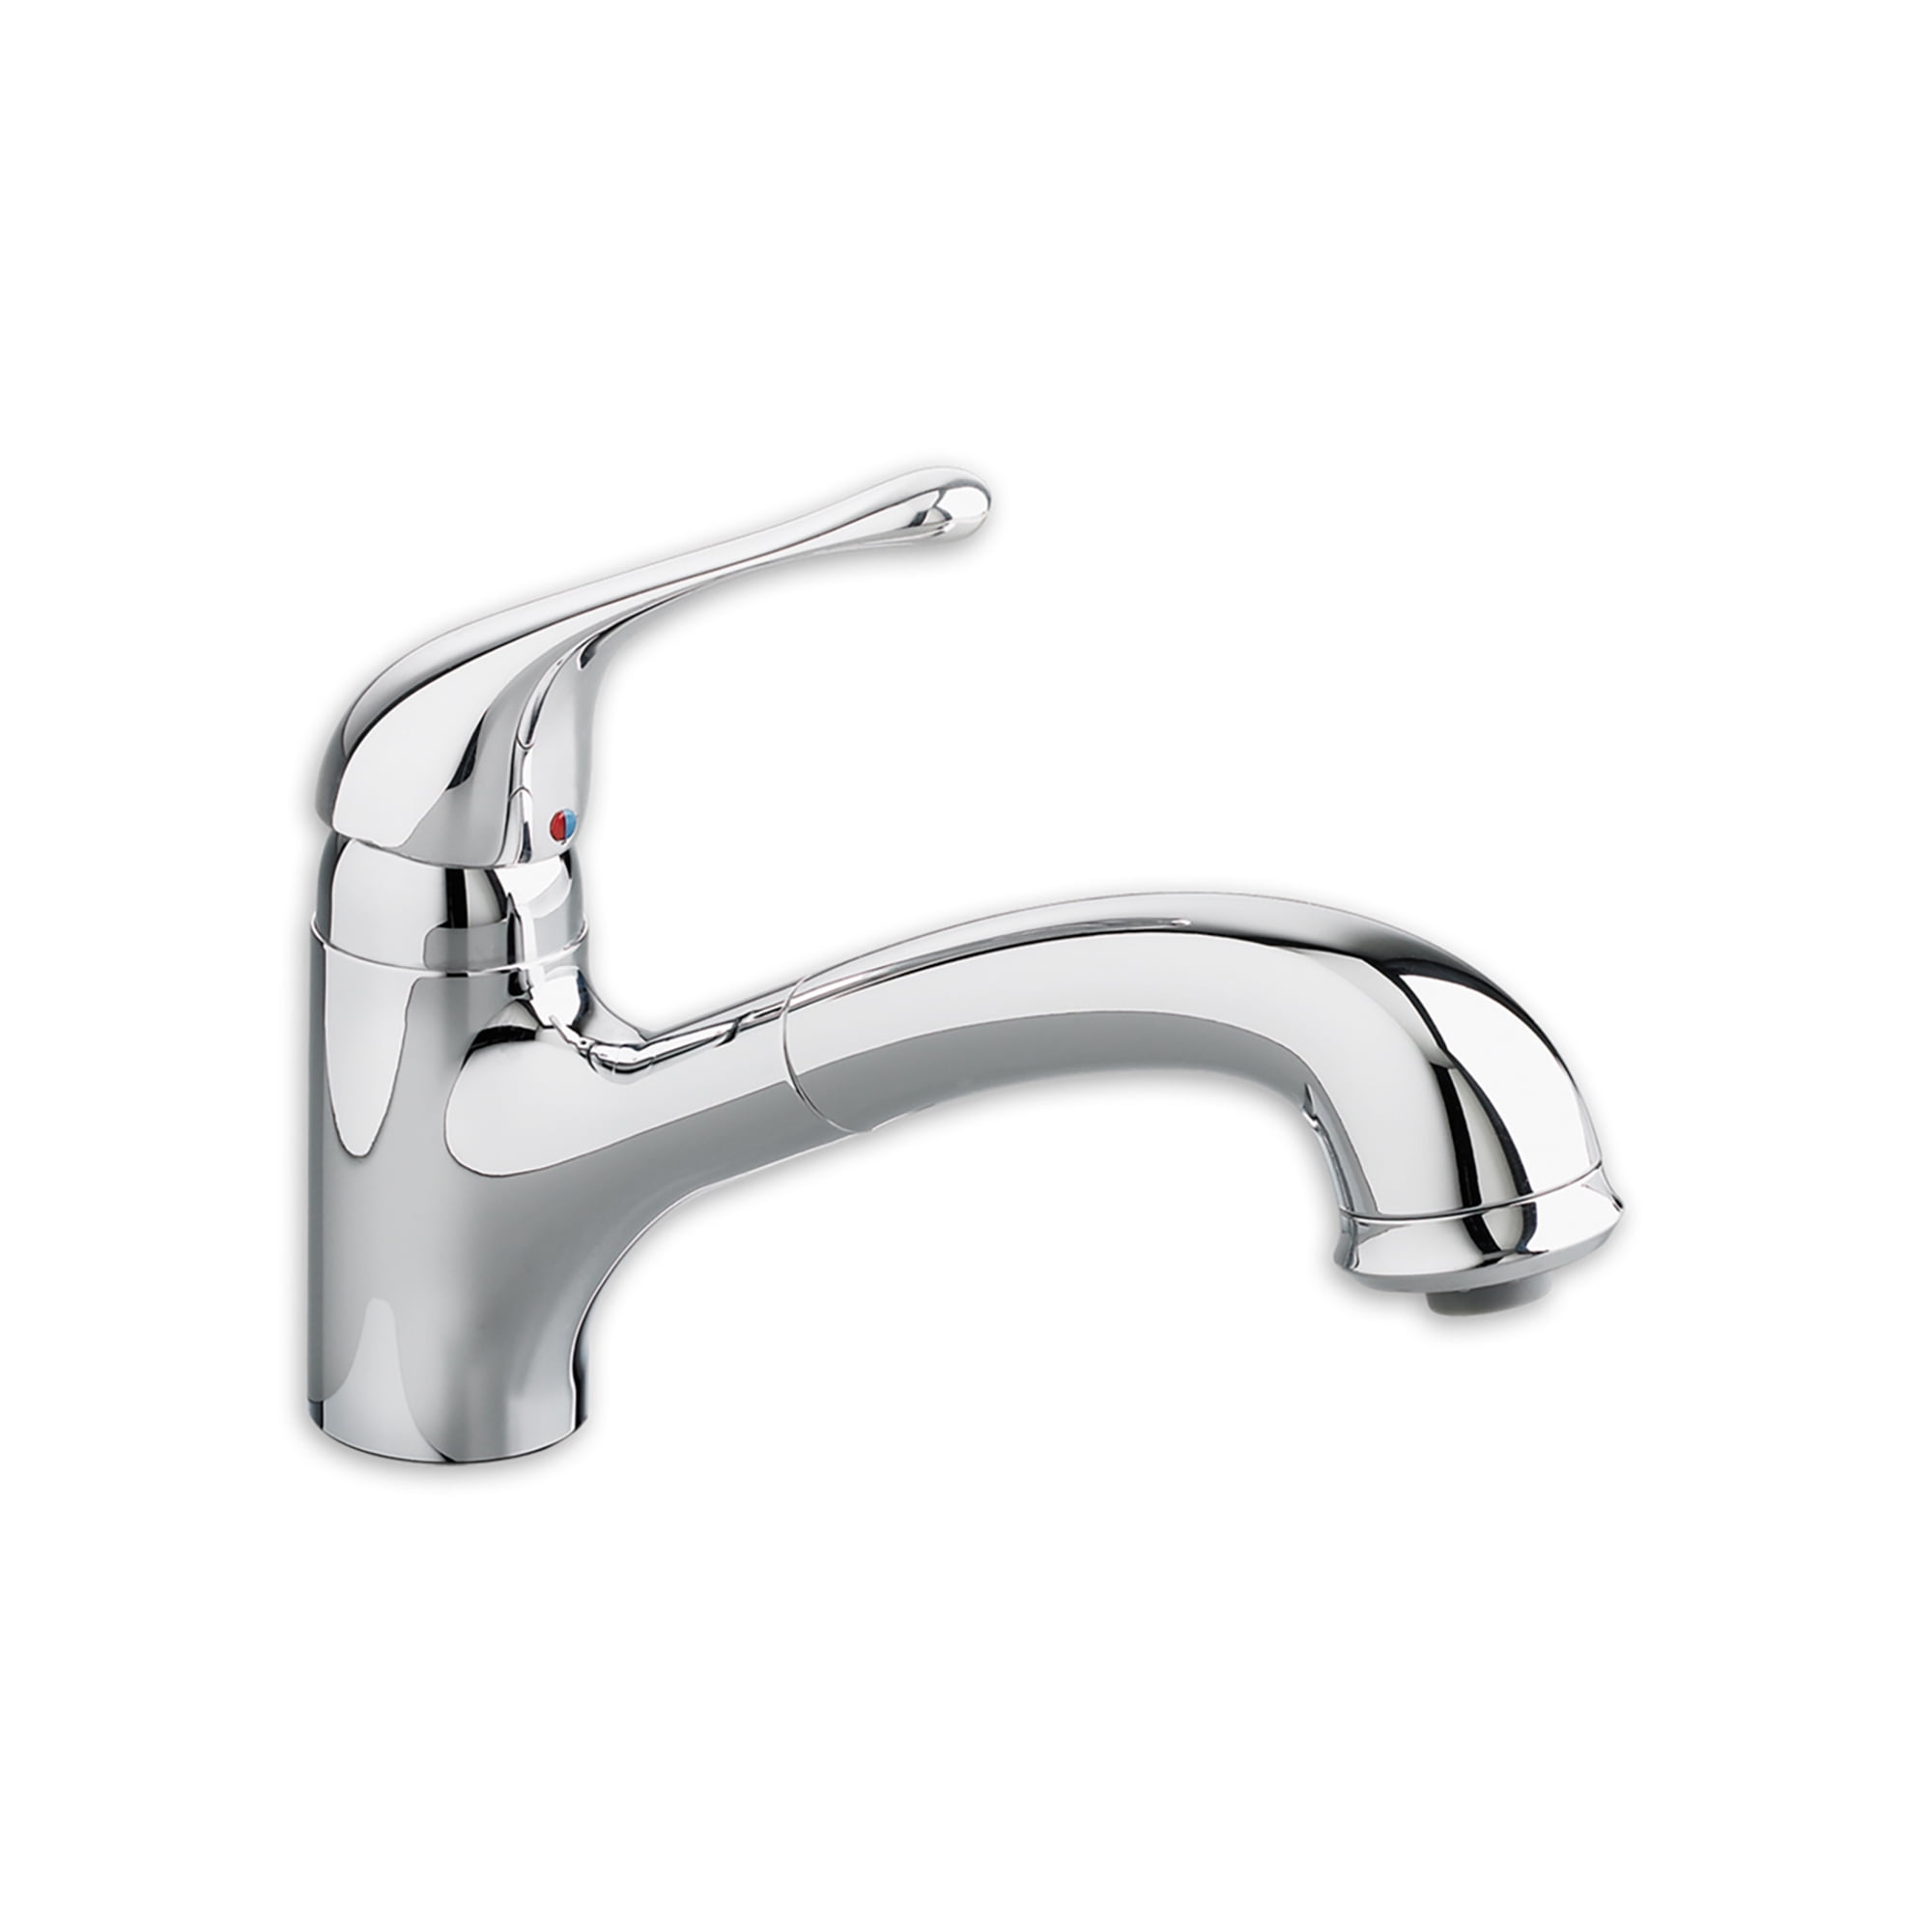 Kitchen Sink Faucet Pot Filler Tap Semi-Automatic Rotary Switch Brass Chrome 